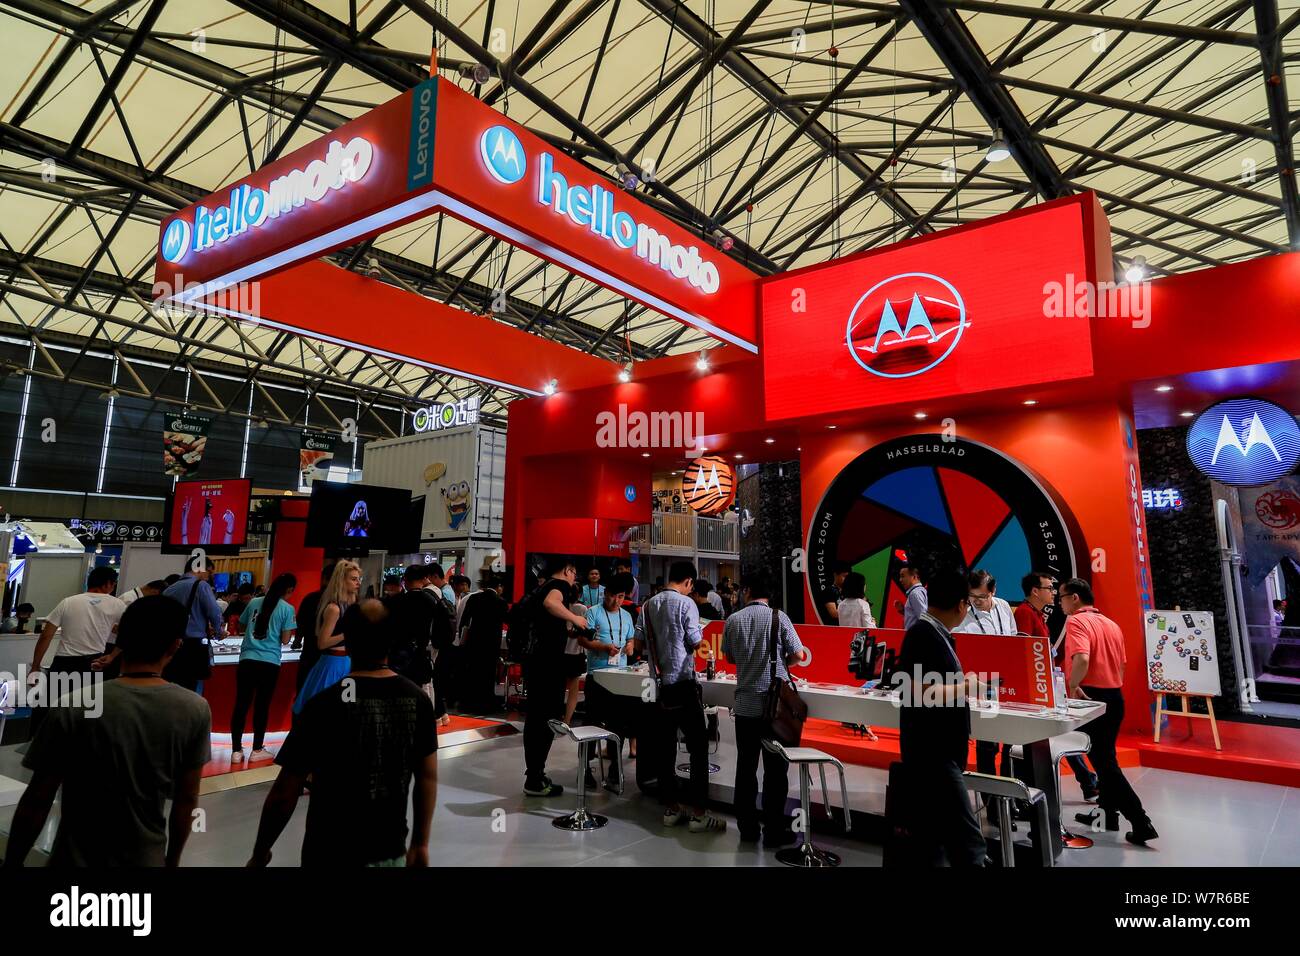 People visit the stand of MOTO during the 2017 Mobile World Congress (MWC) in Shanghai, China, 28 June 2017.   The Mobile World Congress 2017 opened i Stock Photo